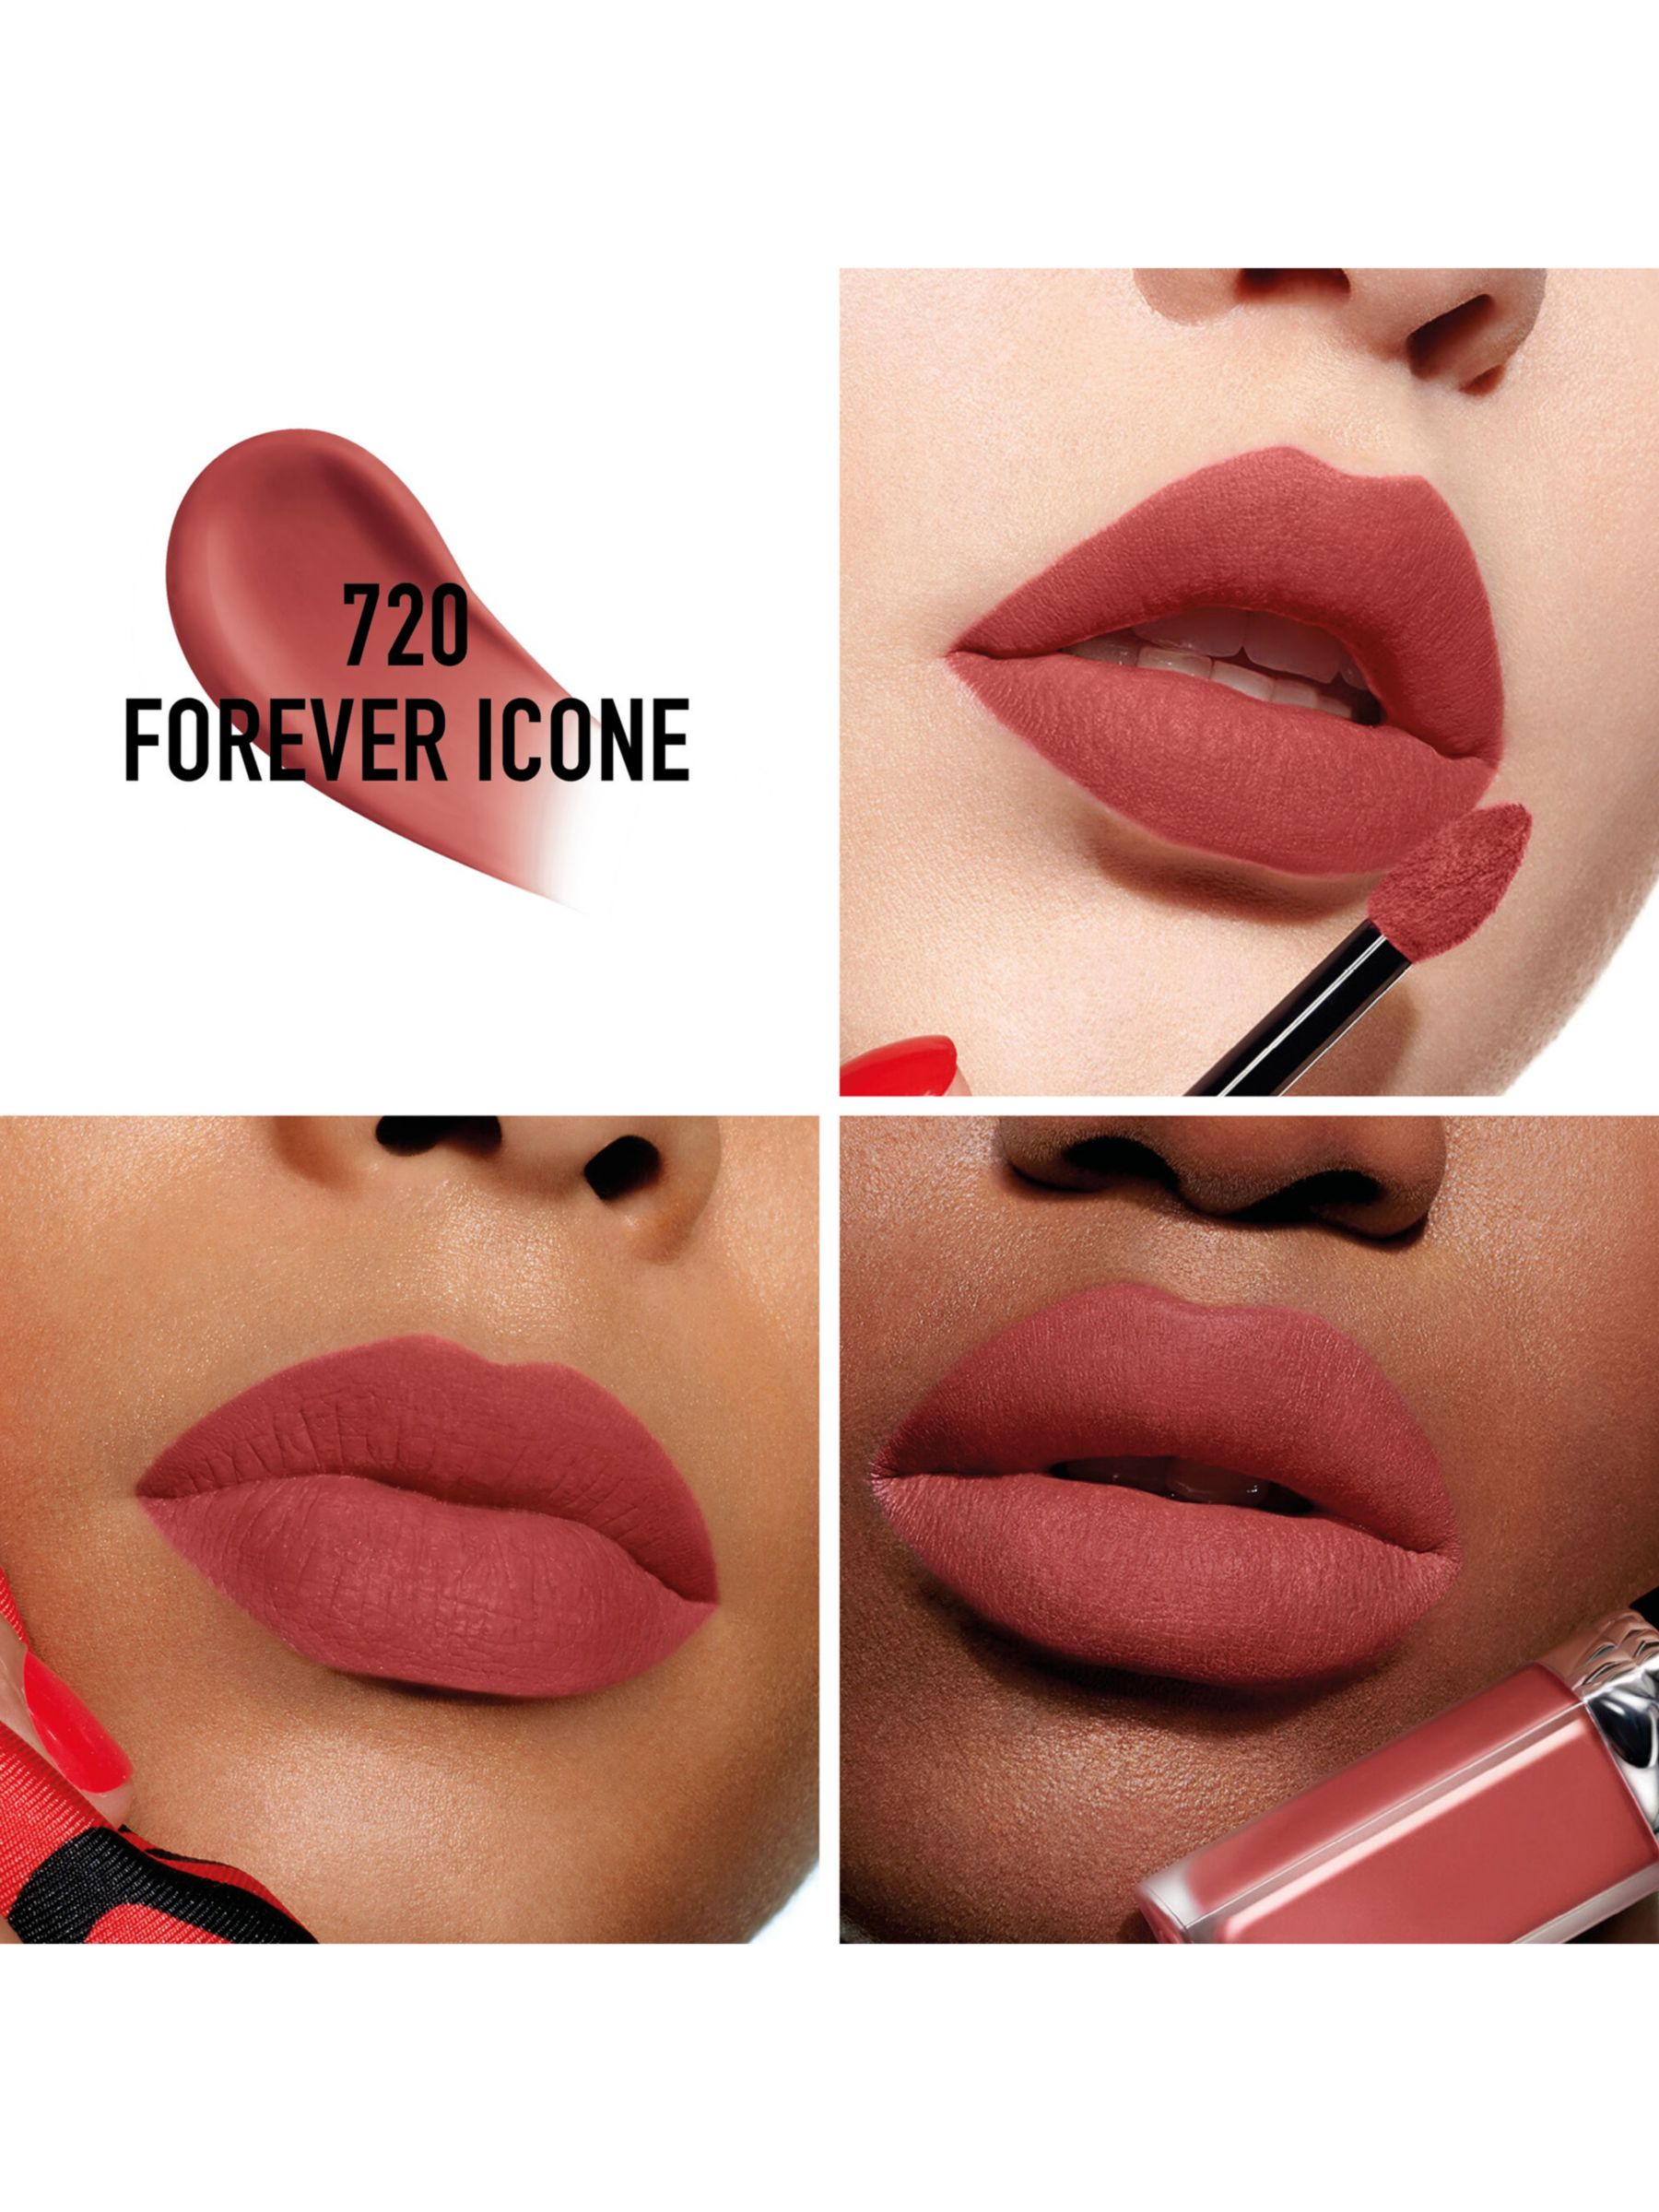 Dior Rouge Dior Forever Liquid Lipstick 720 Forever Icone At John Lewis And Partners 